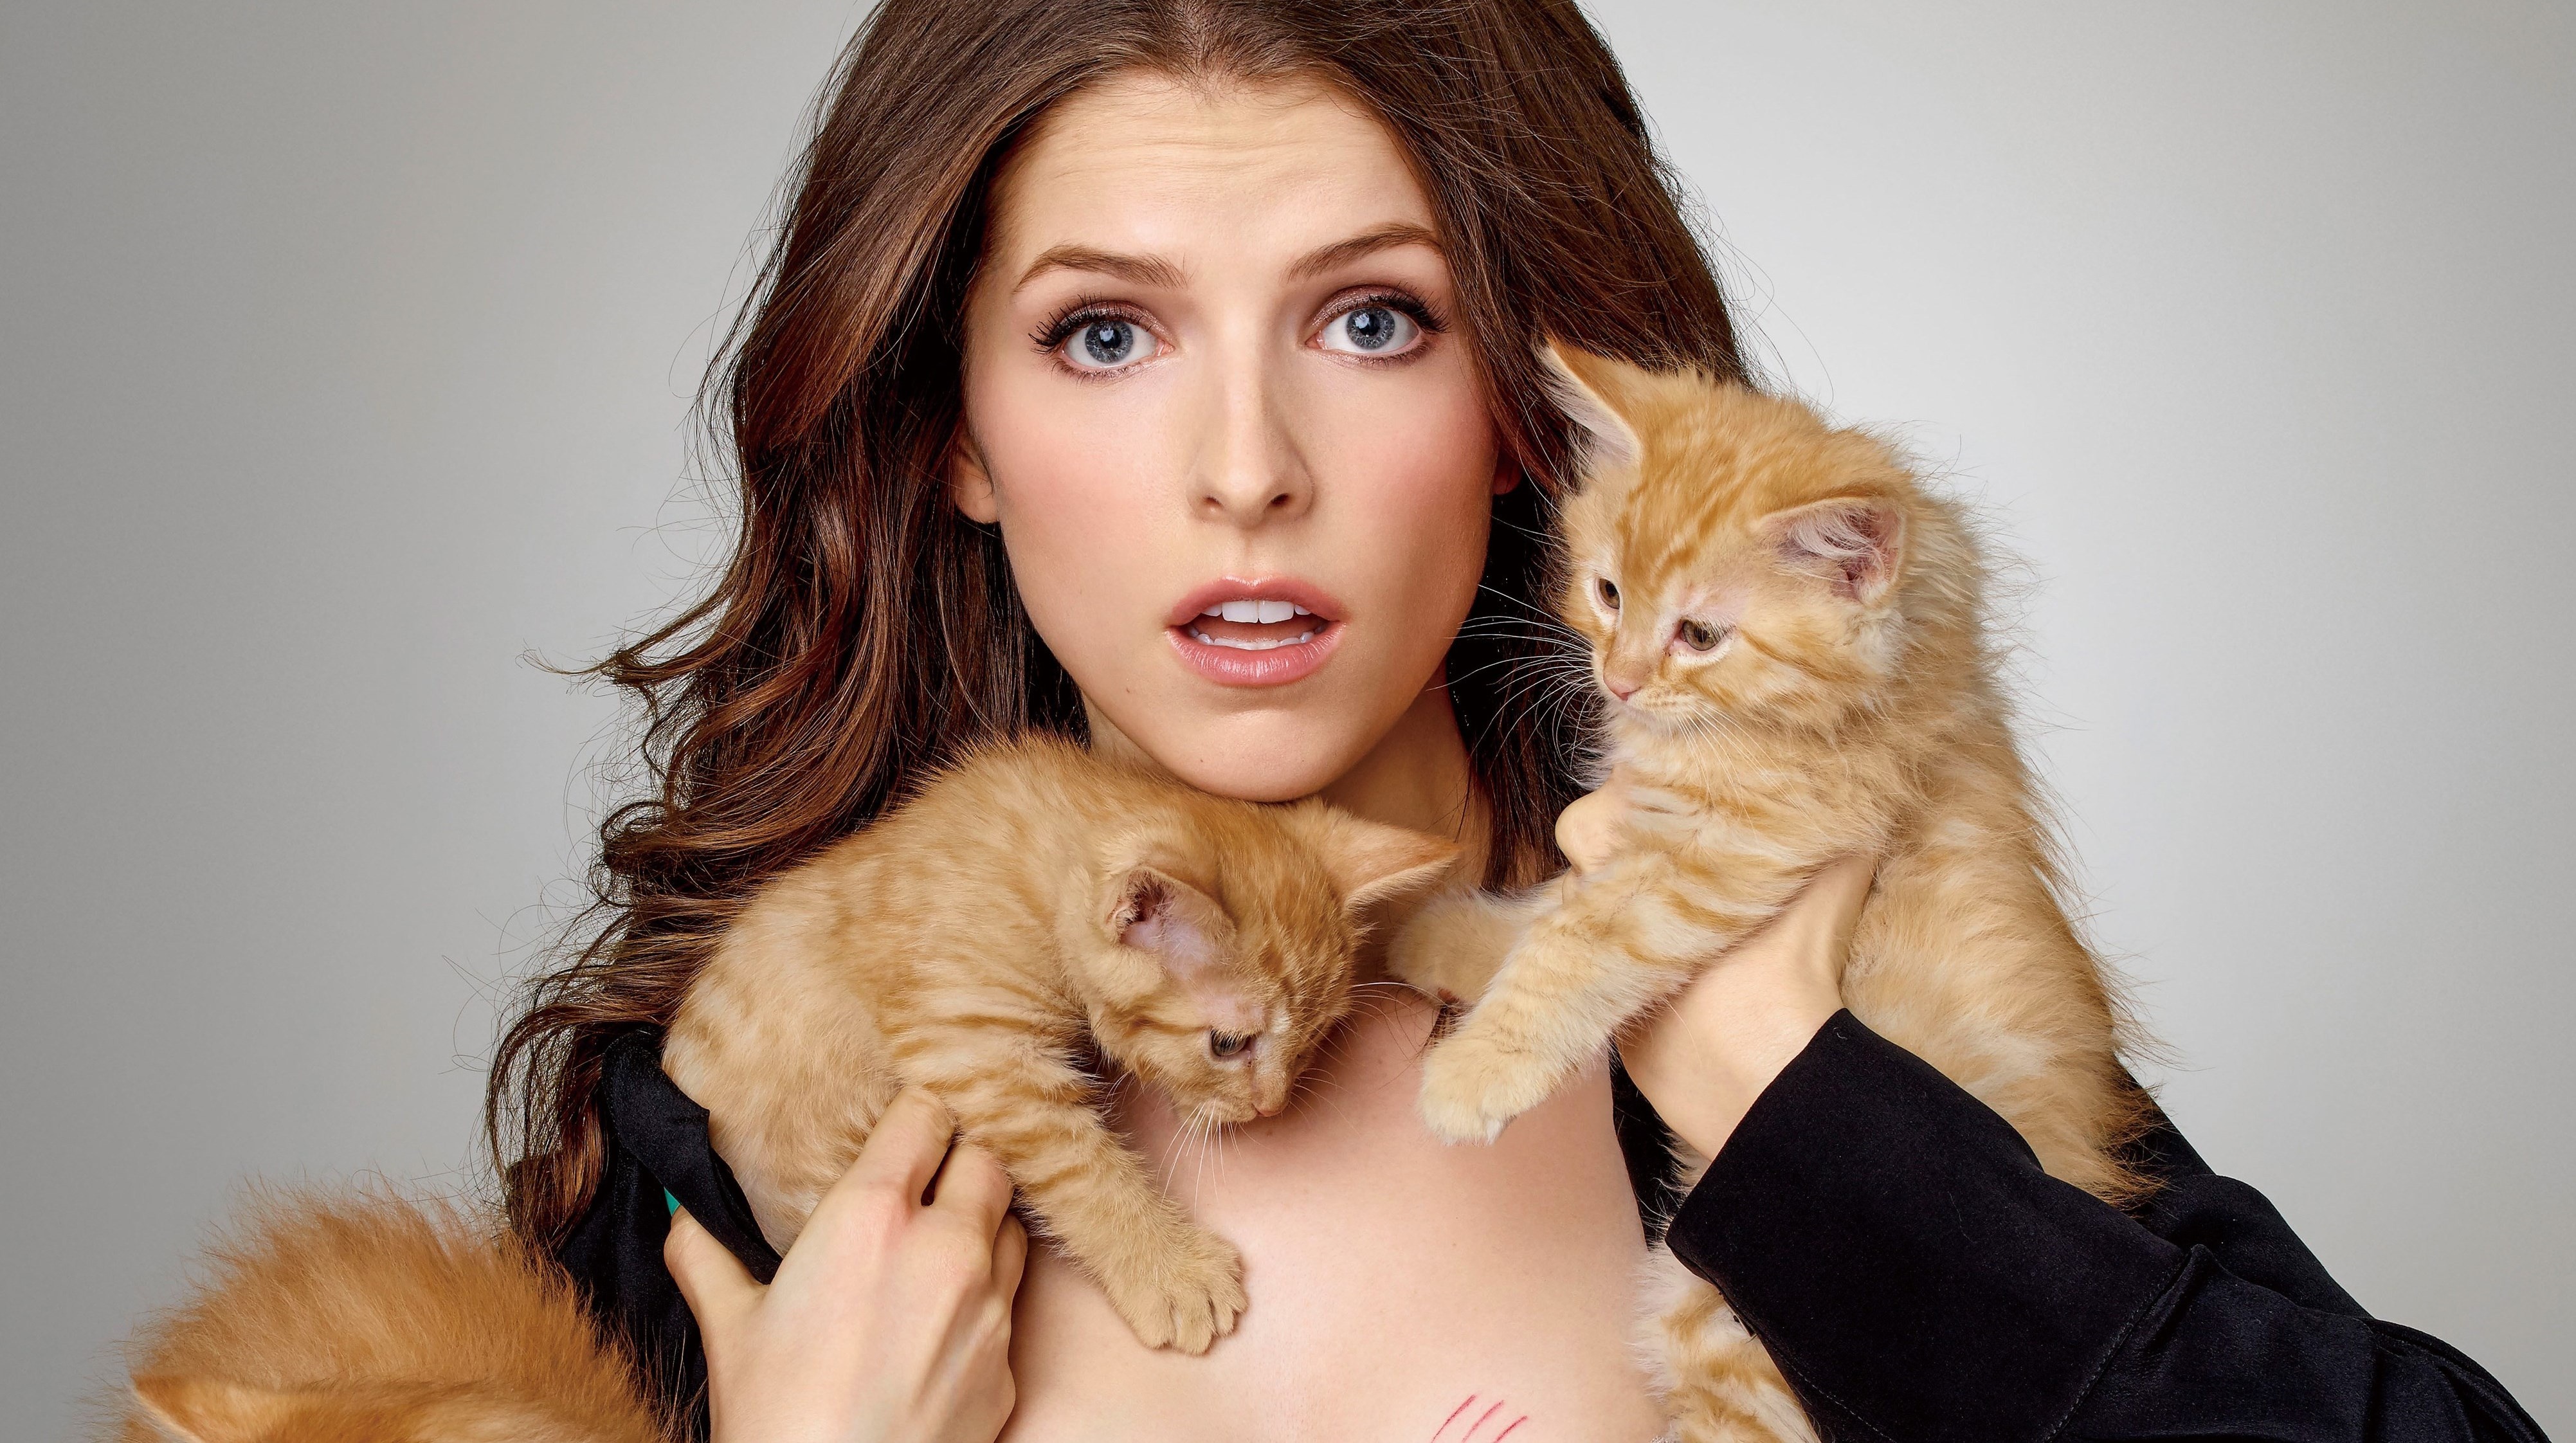 Cute Anna Kendrick Playing With Kittens